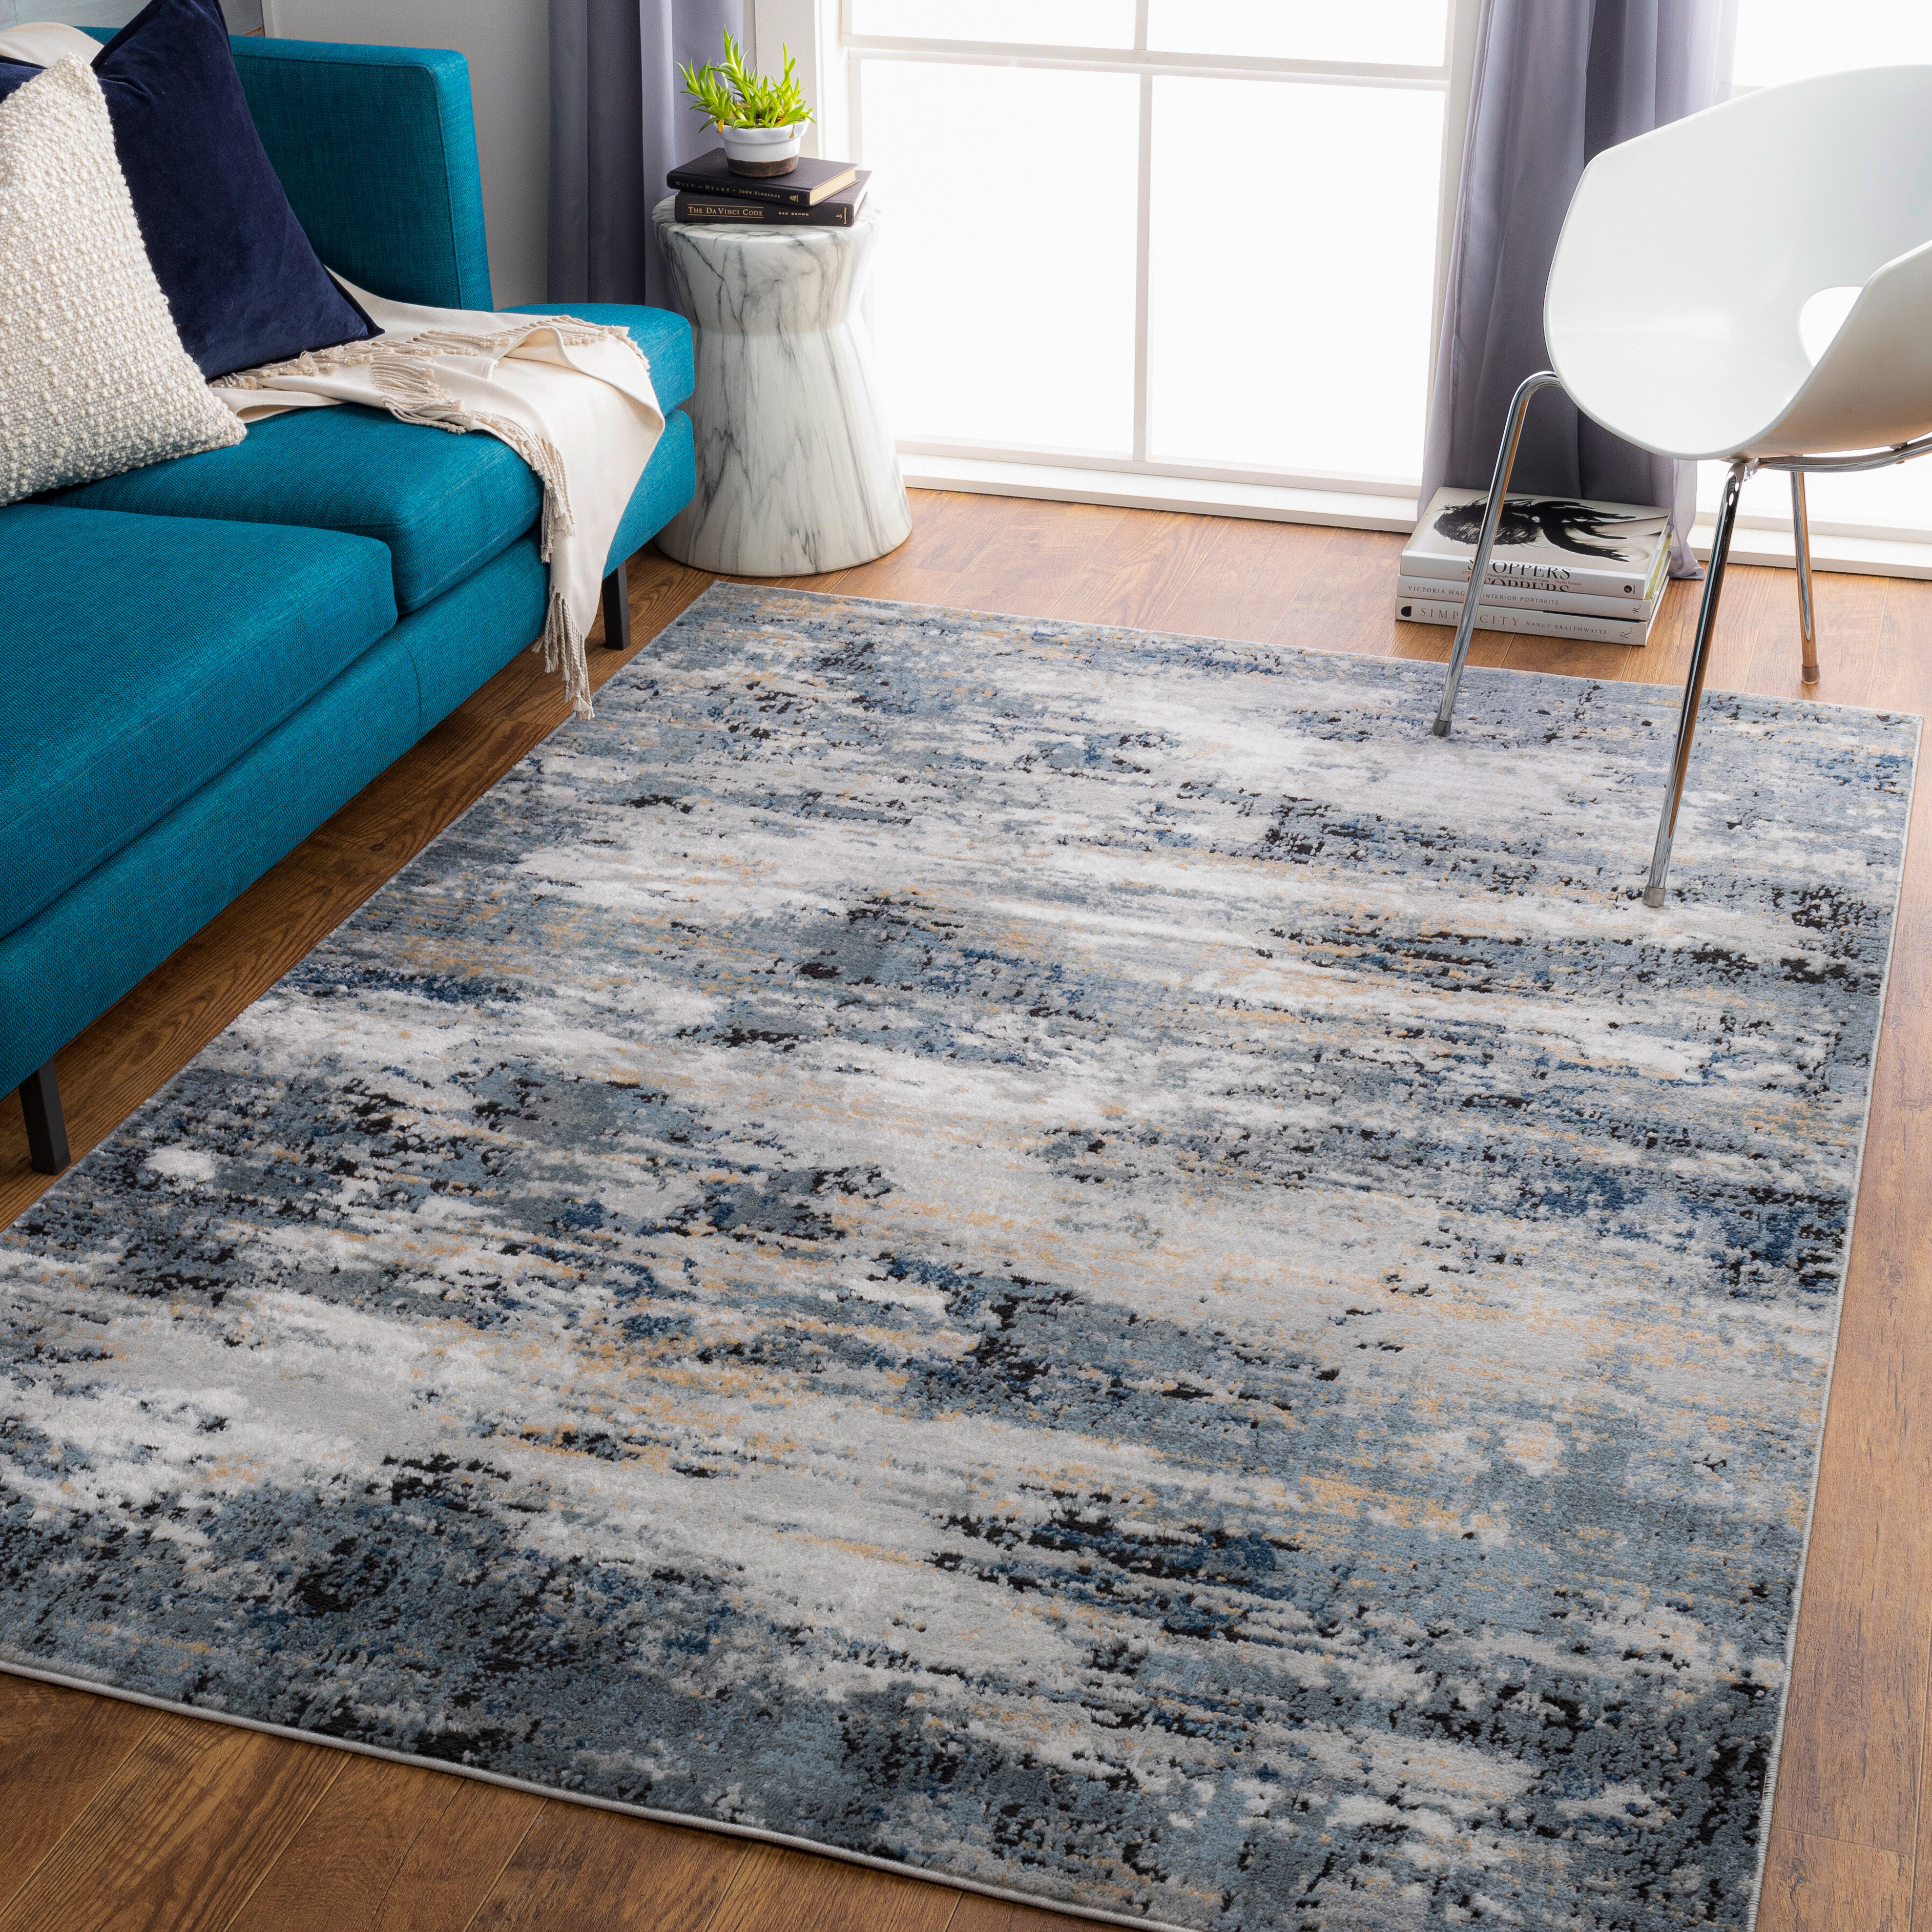 Living Room Rugs Stunning Geometric Large Area Carpets for Interior Floor  Decor - Warmly Home